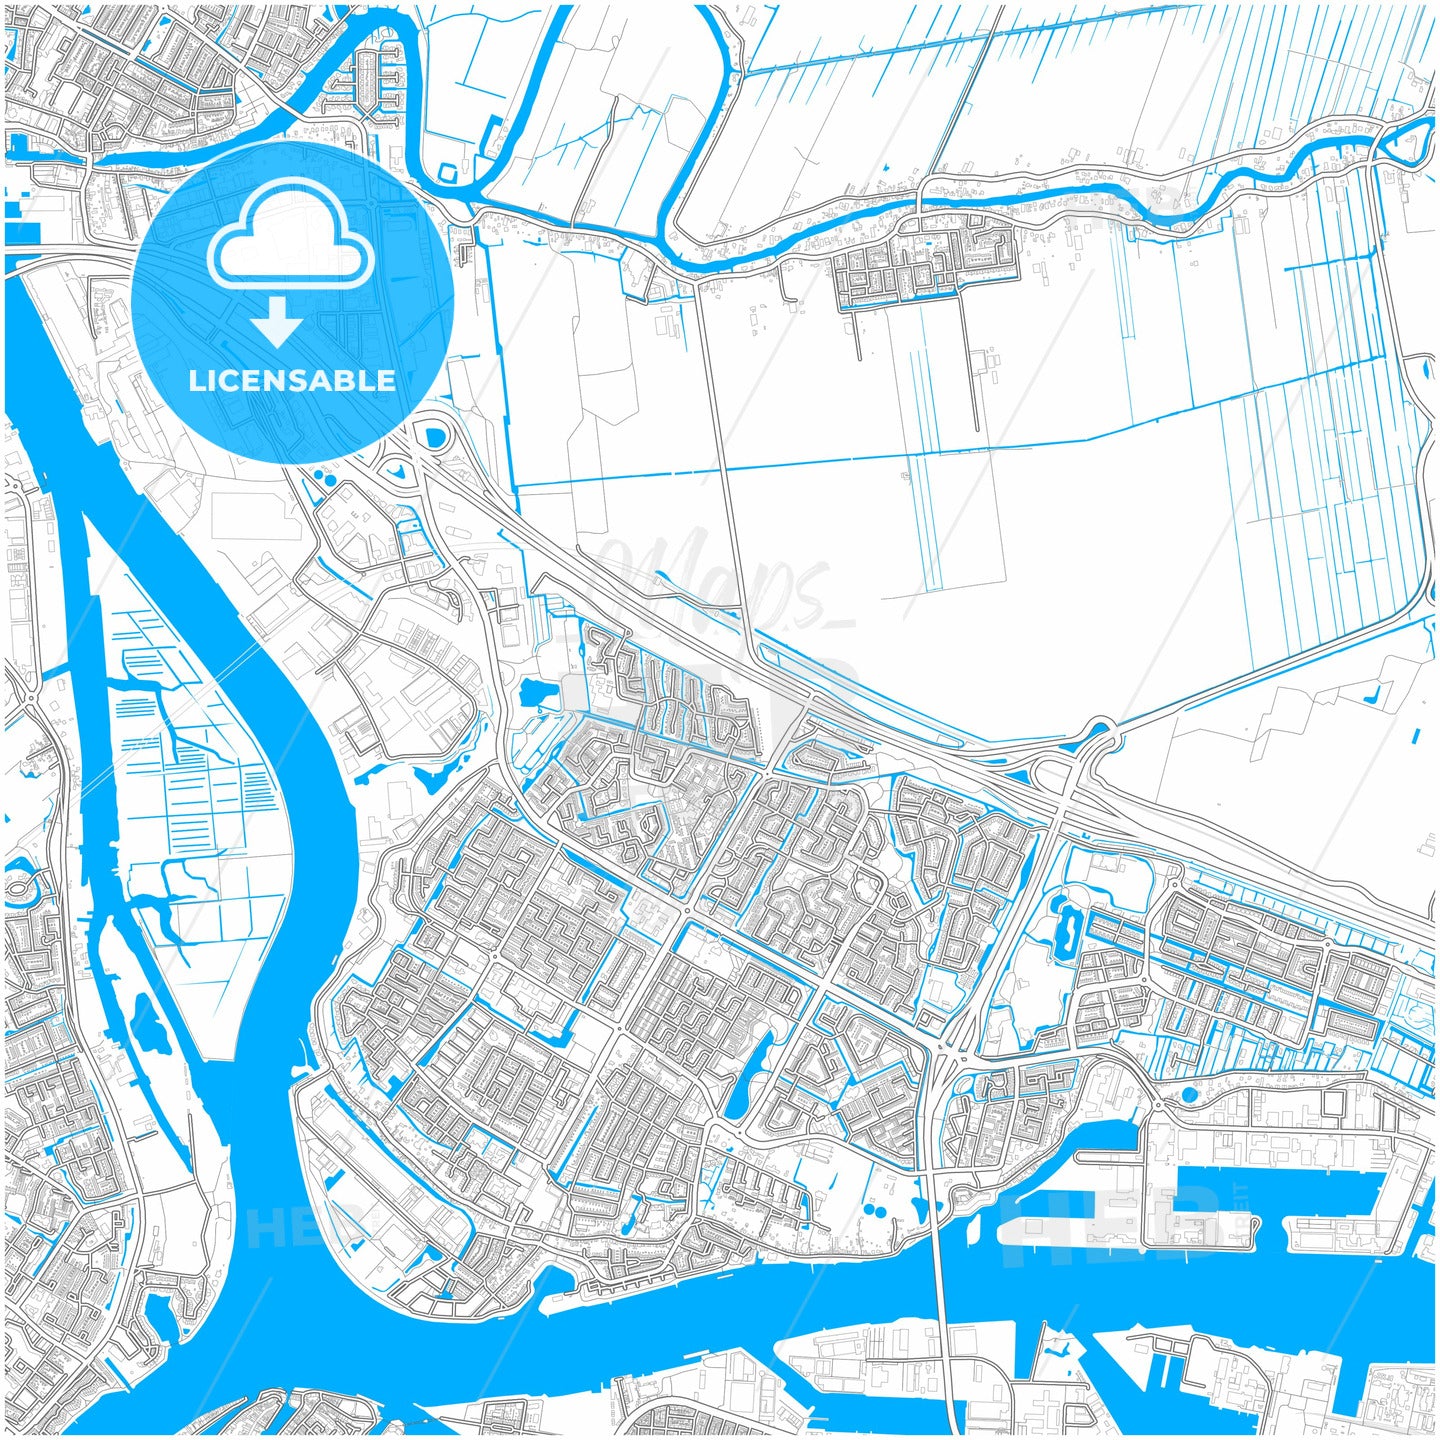 Papendrecht, South Holland, Netherlands, city map with high quality roads.